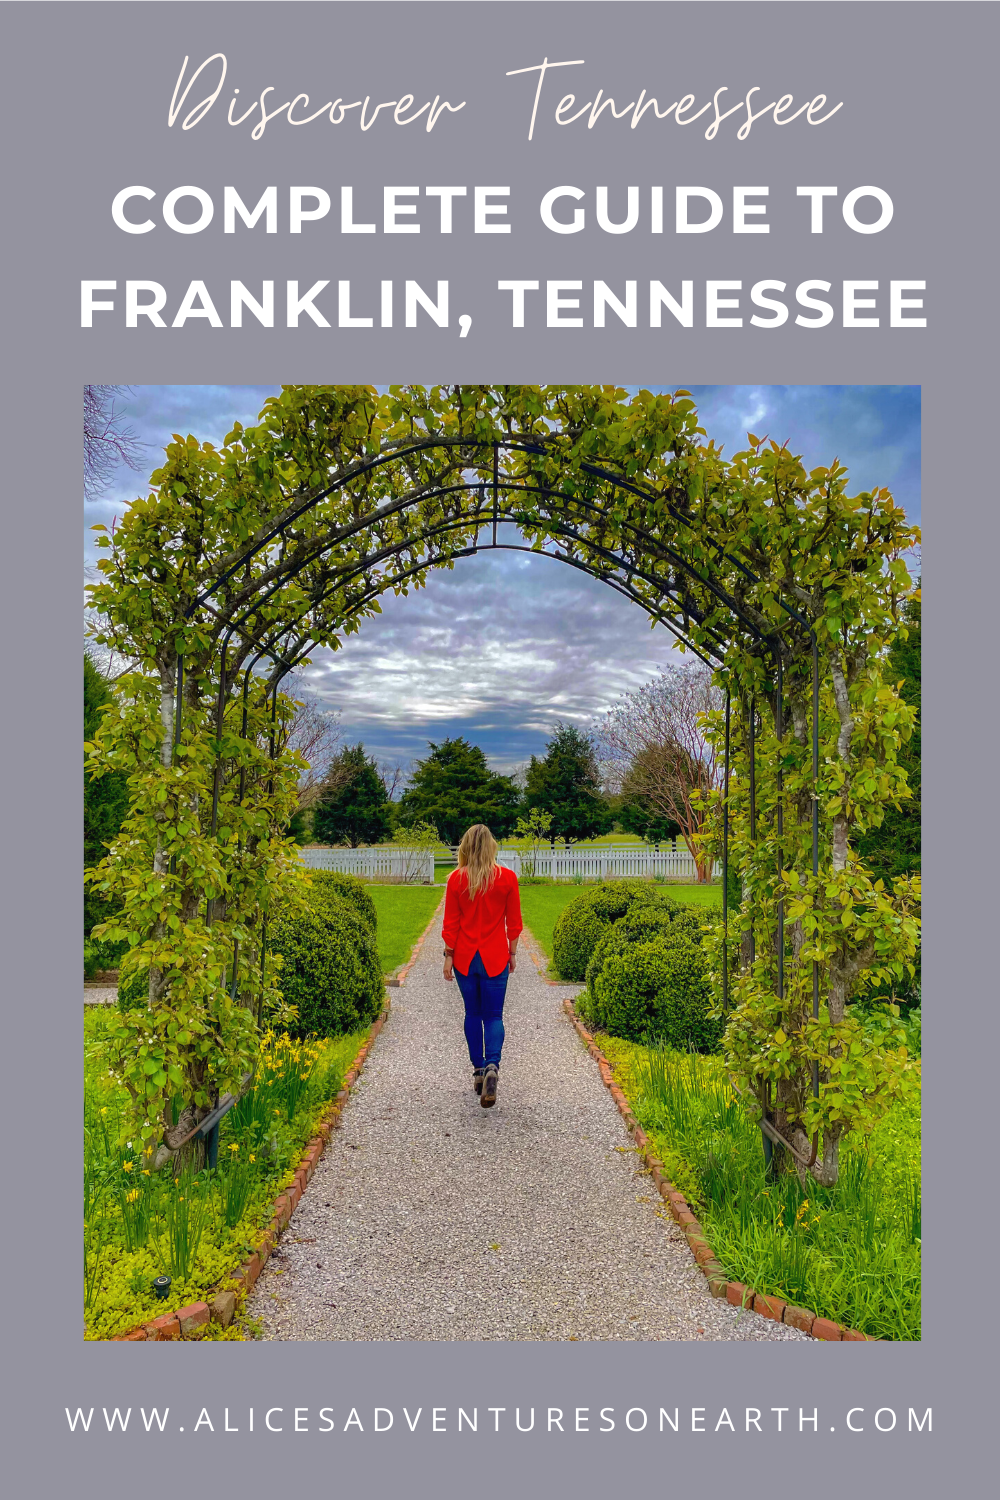 Complete Guide to Franklin, Tennessee